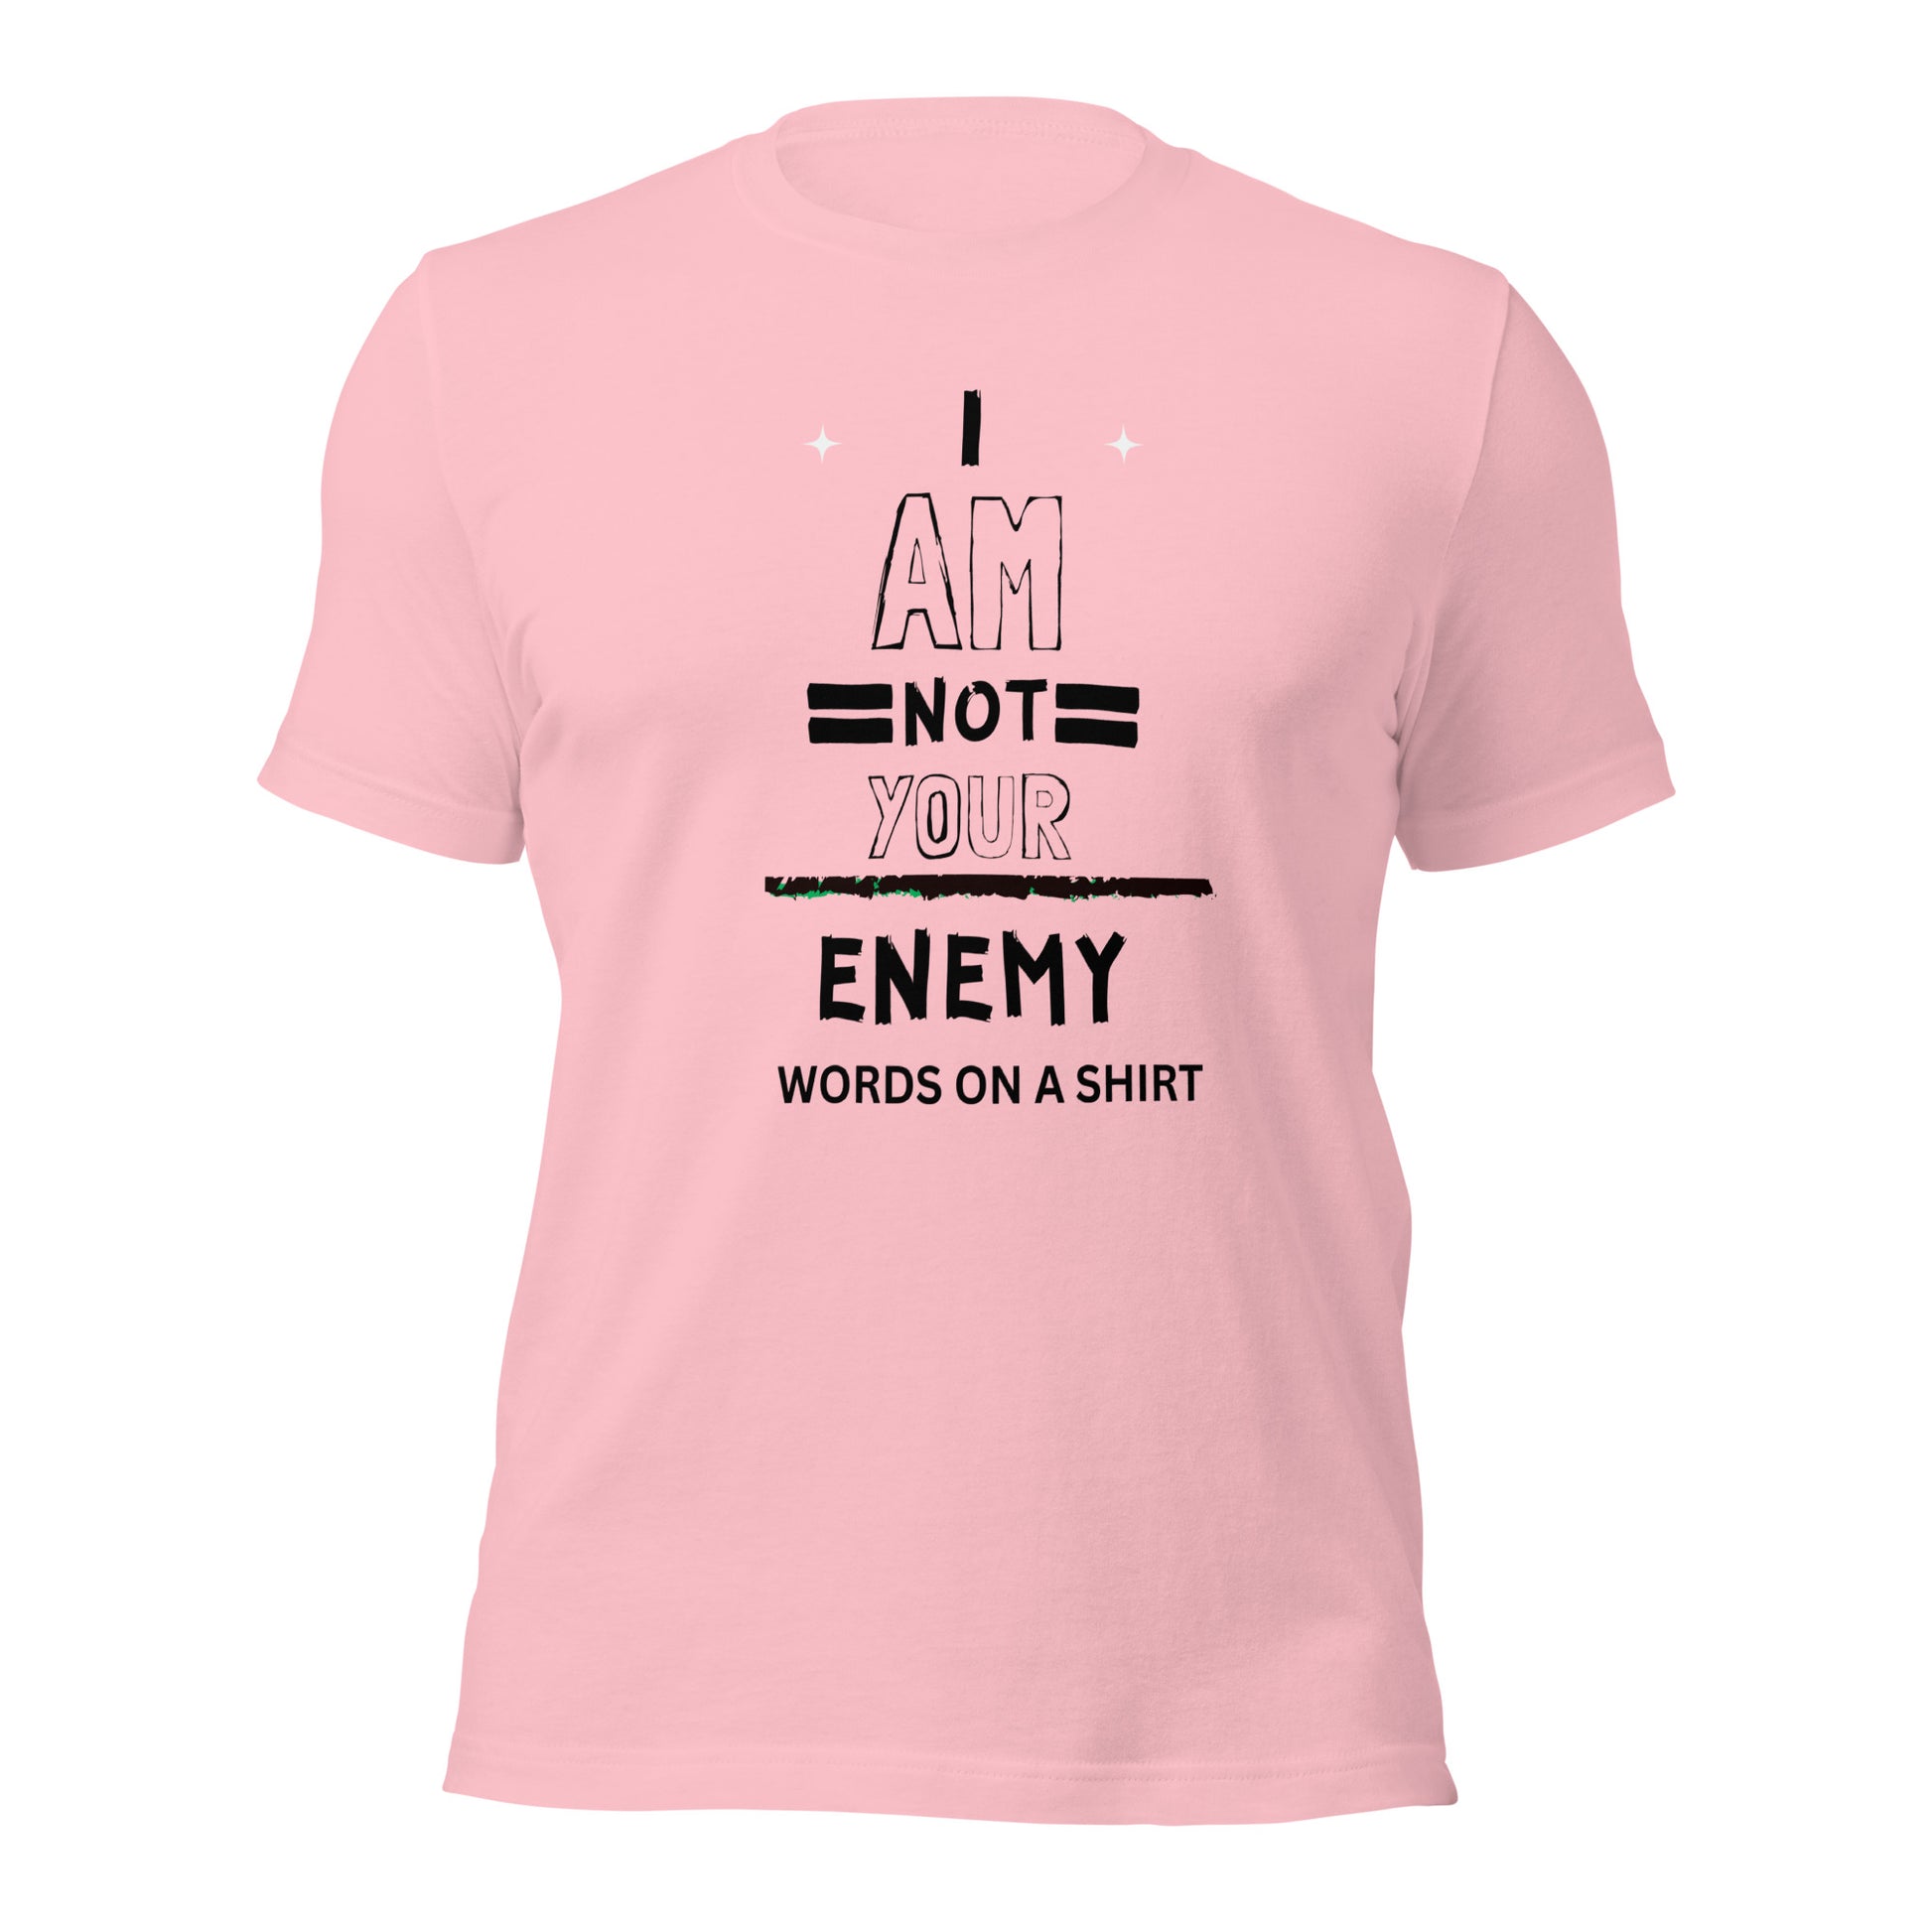 Don't fall for the same old t-shirts, this one stands out from the rest. Its exceptional comfort, breathability, and ideal stretch make it truly unique. And as a bonus, it boldly states: I Am Not Your Enemy. Need I say more?